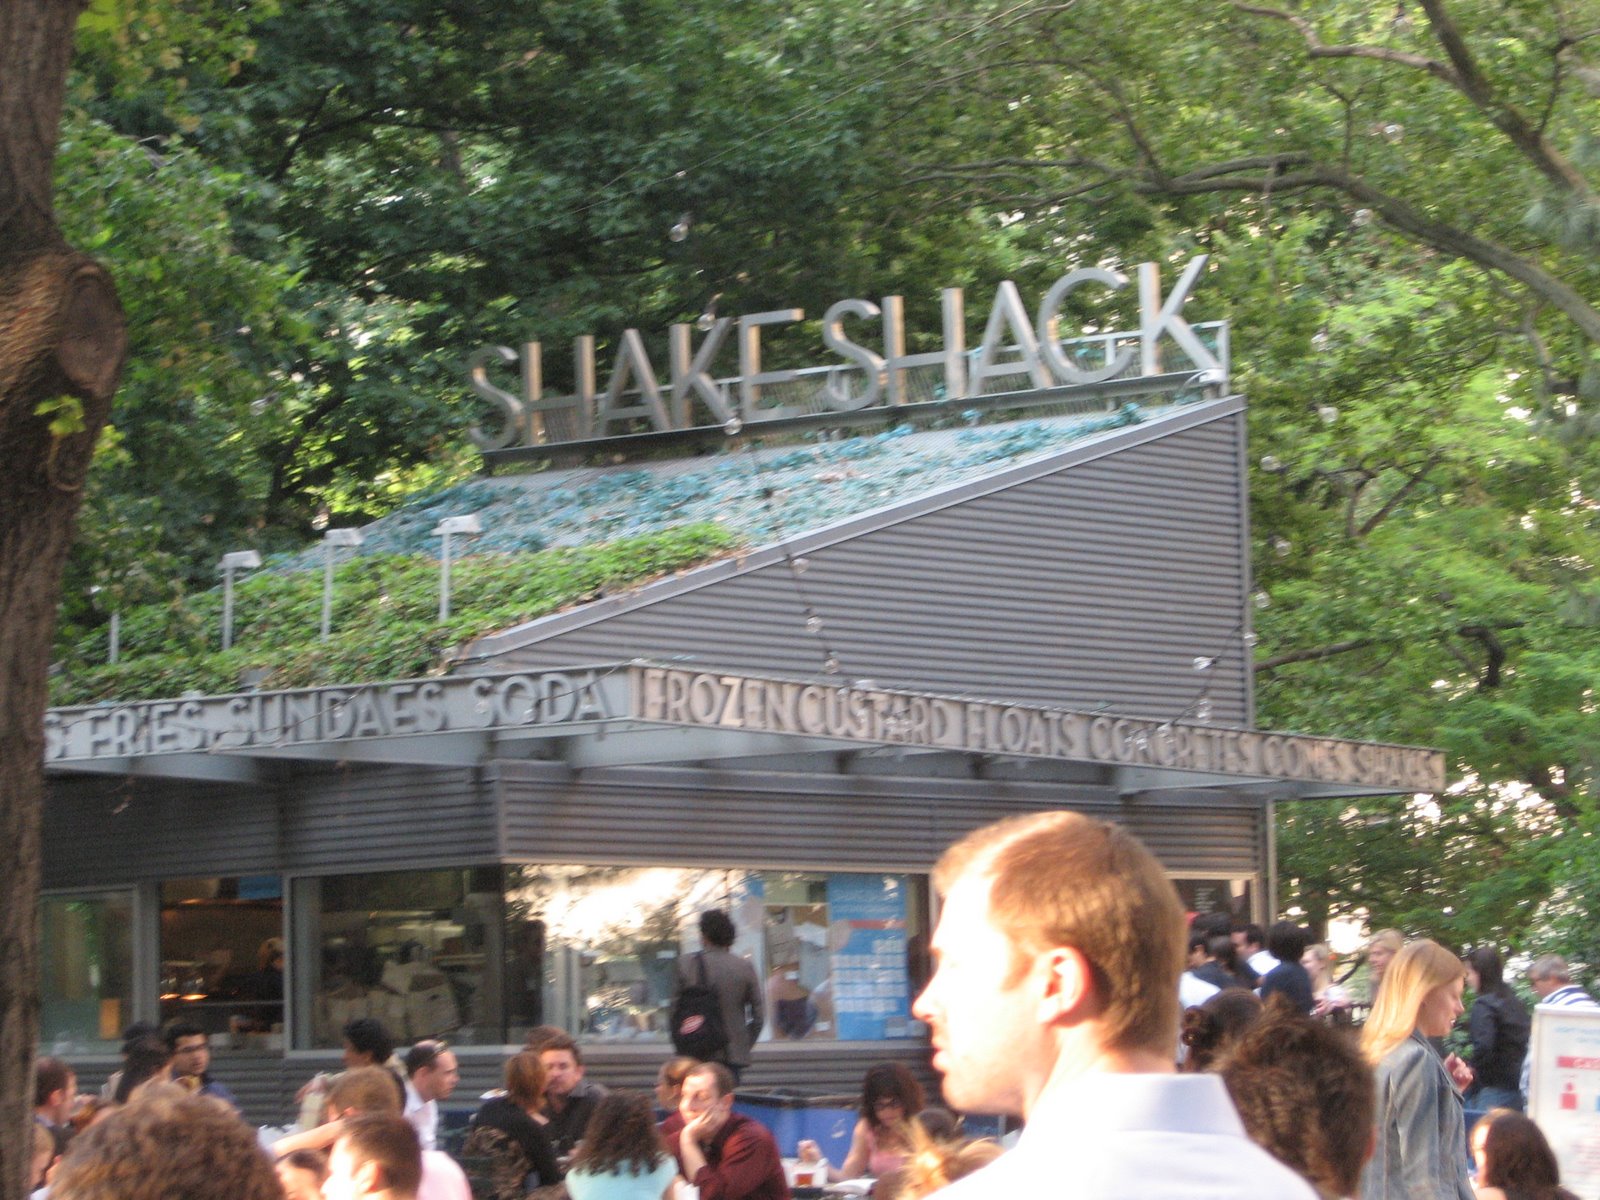 [Leaving+and+first+two+weeks+068+Shake+Shack.jpg]